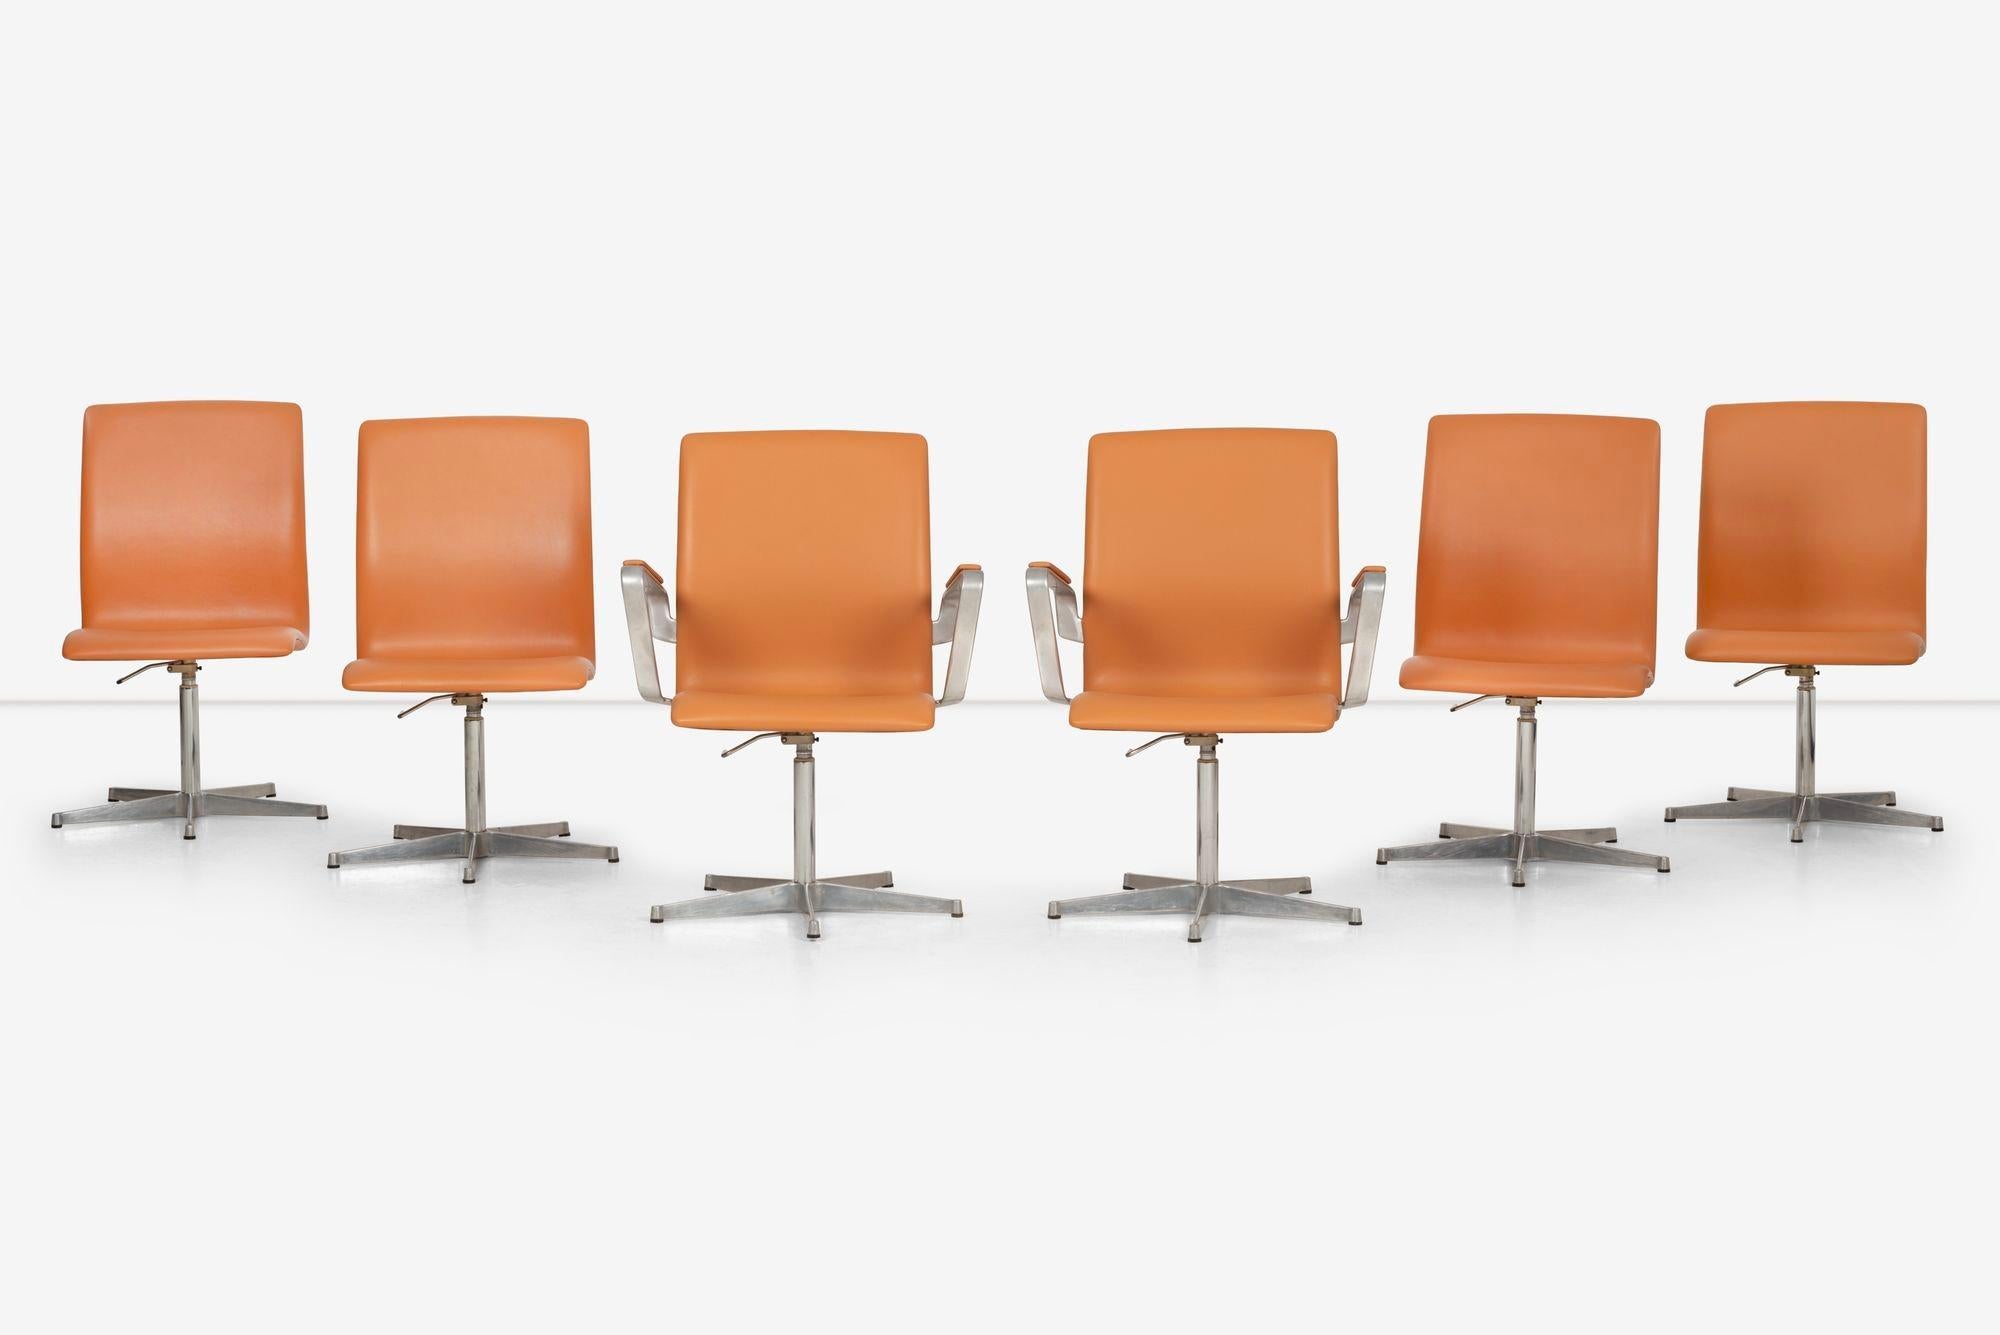 Walter Knoll Low-Back Oxford Chairs Set of Six Two with Arms Four Armless features five star bases in aluminum. Swivel with adjustable heights.
Newly upholstered with Spinneybeck Tan Cognac leather.
Label, made in germany